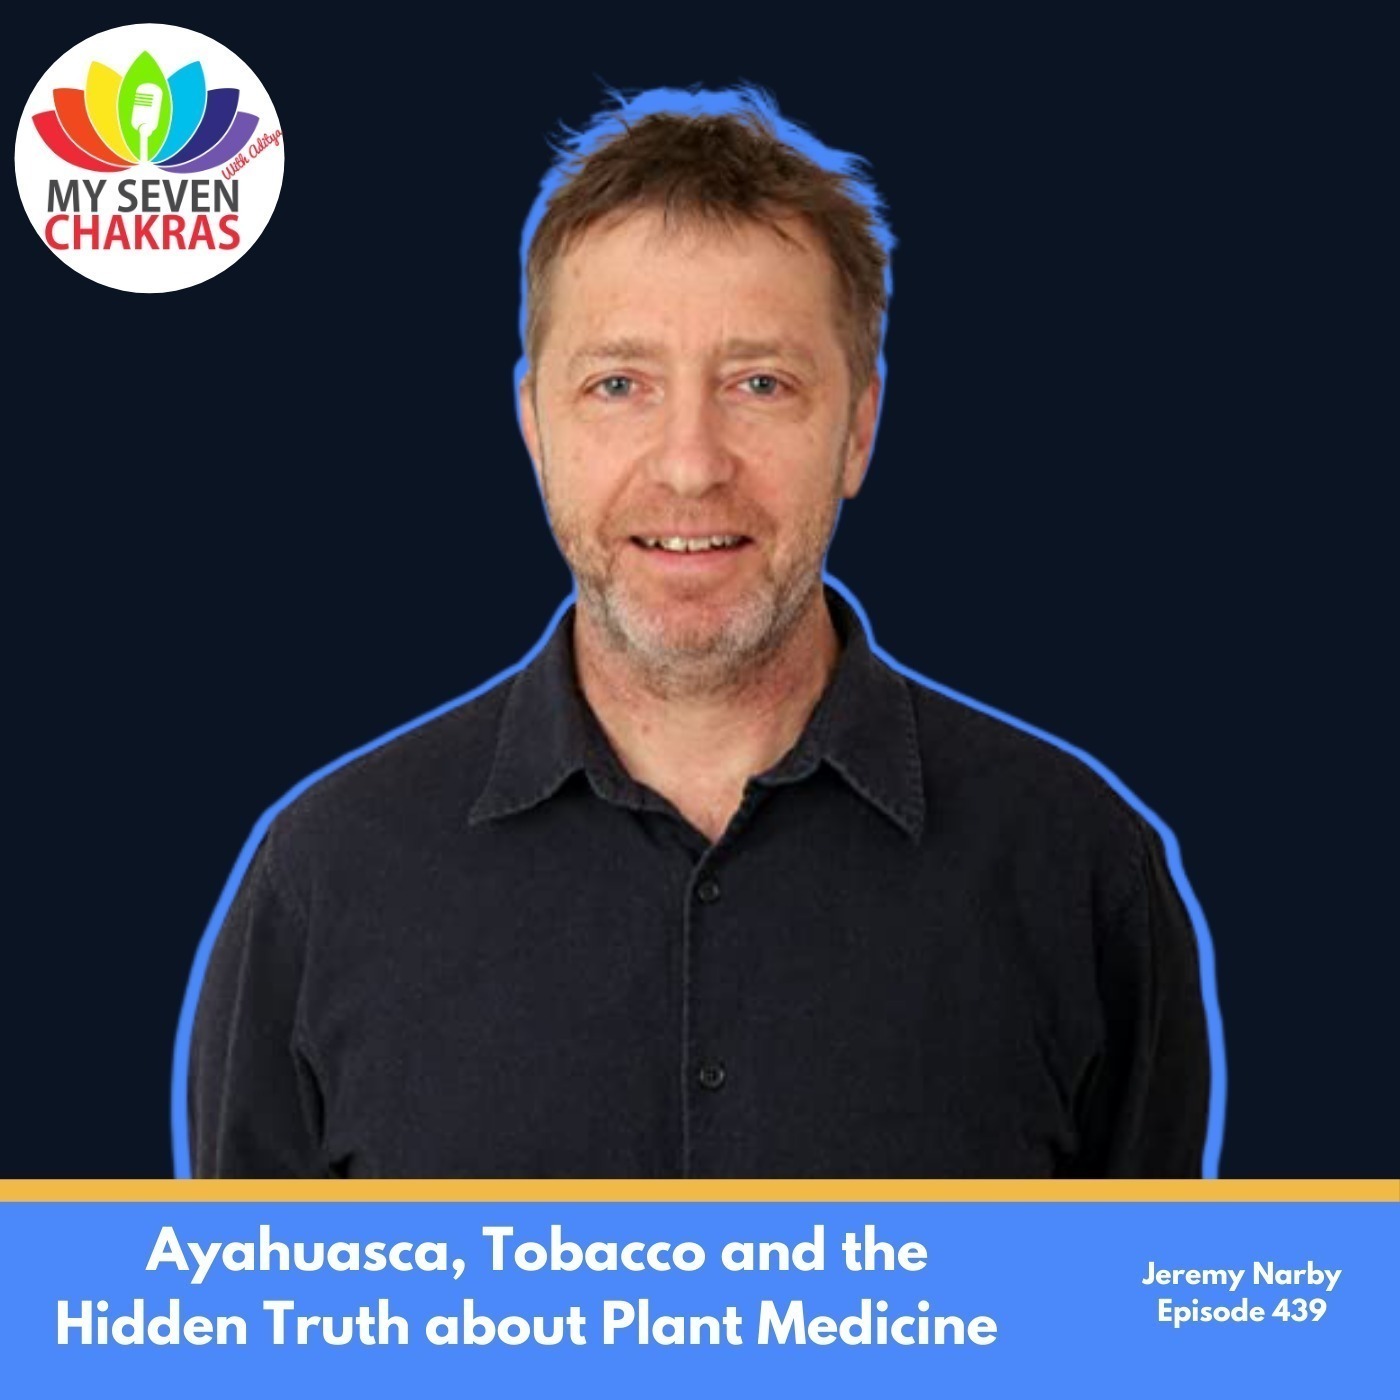 Ayahuasca, Tobacco and the Hidden Truth About Plant Medicine with Jeremy Narby